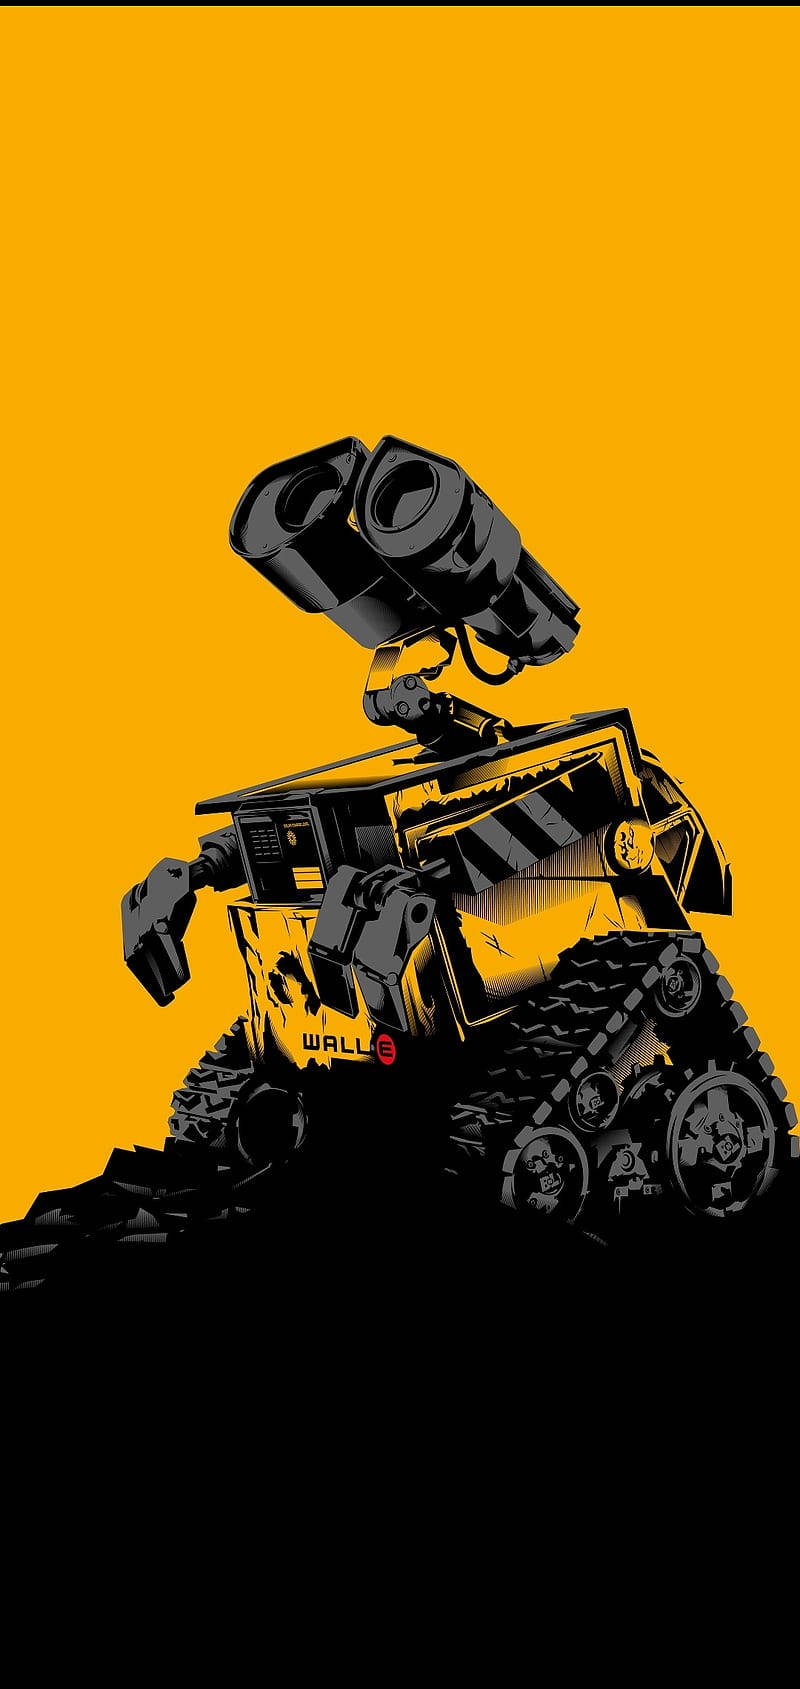 Wall-e Cool Android Vector Wallpaper